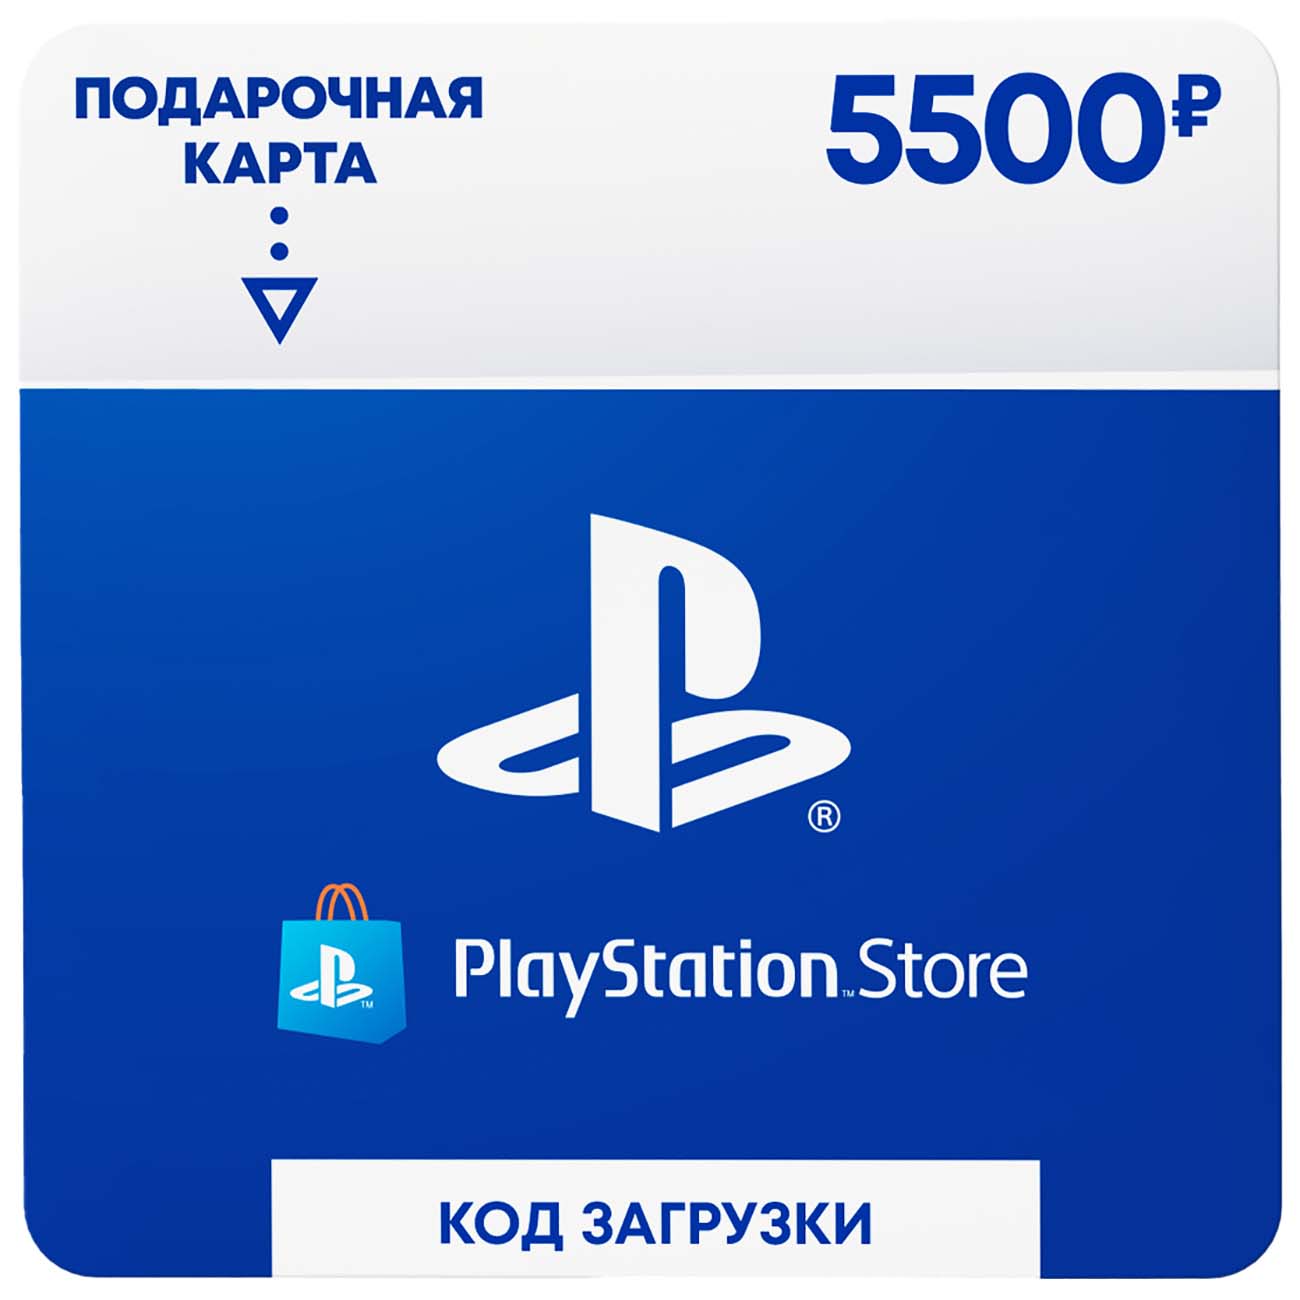 Payment card PSN 5500 rubles PlayStation Network Russia